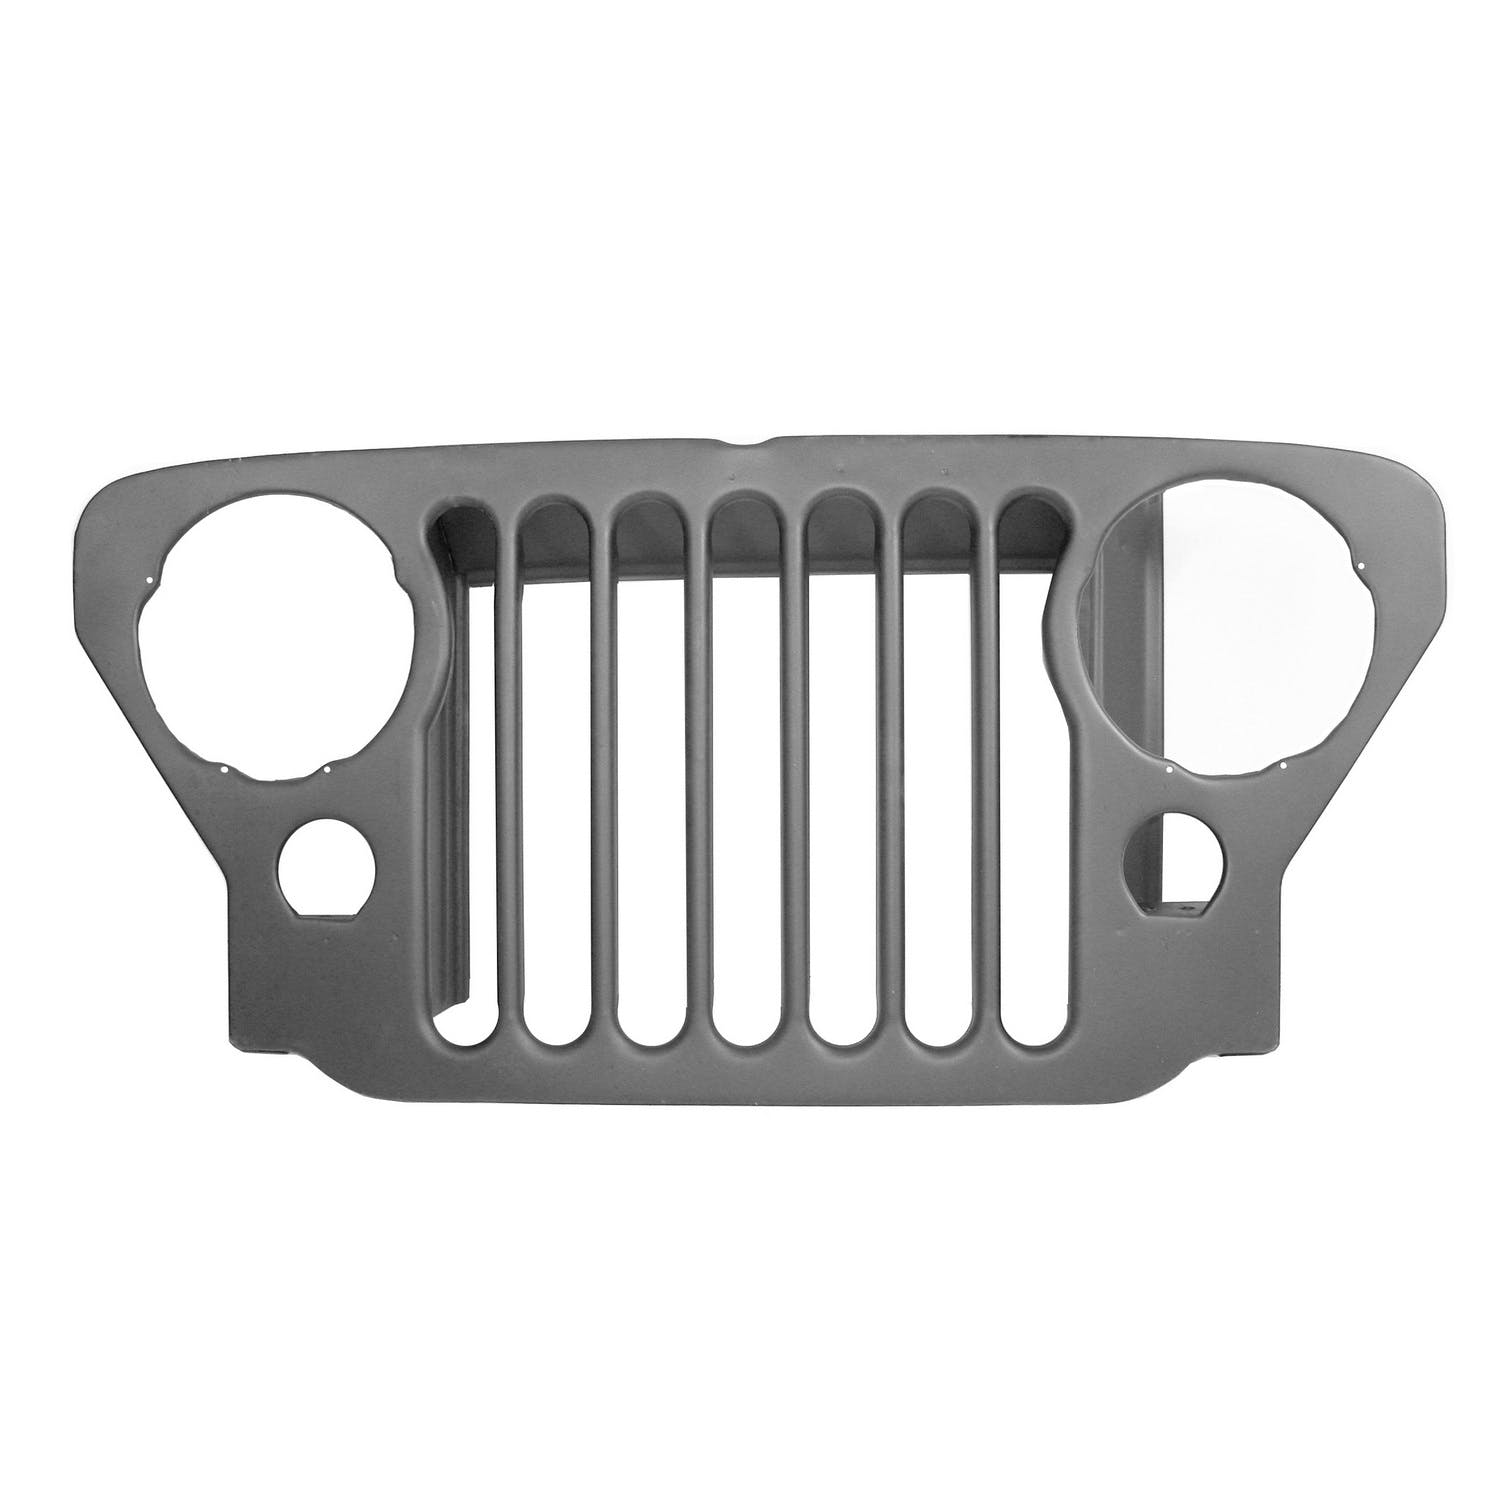 Omix-ADA DMC-663536 Steel Replacement Grille